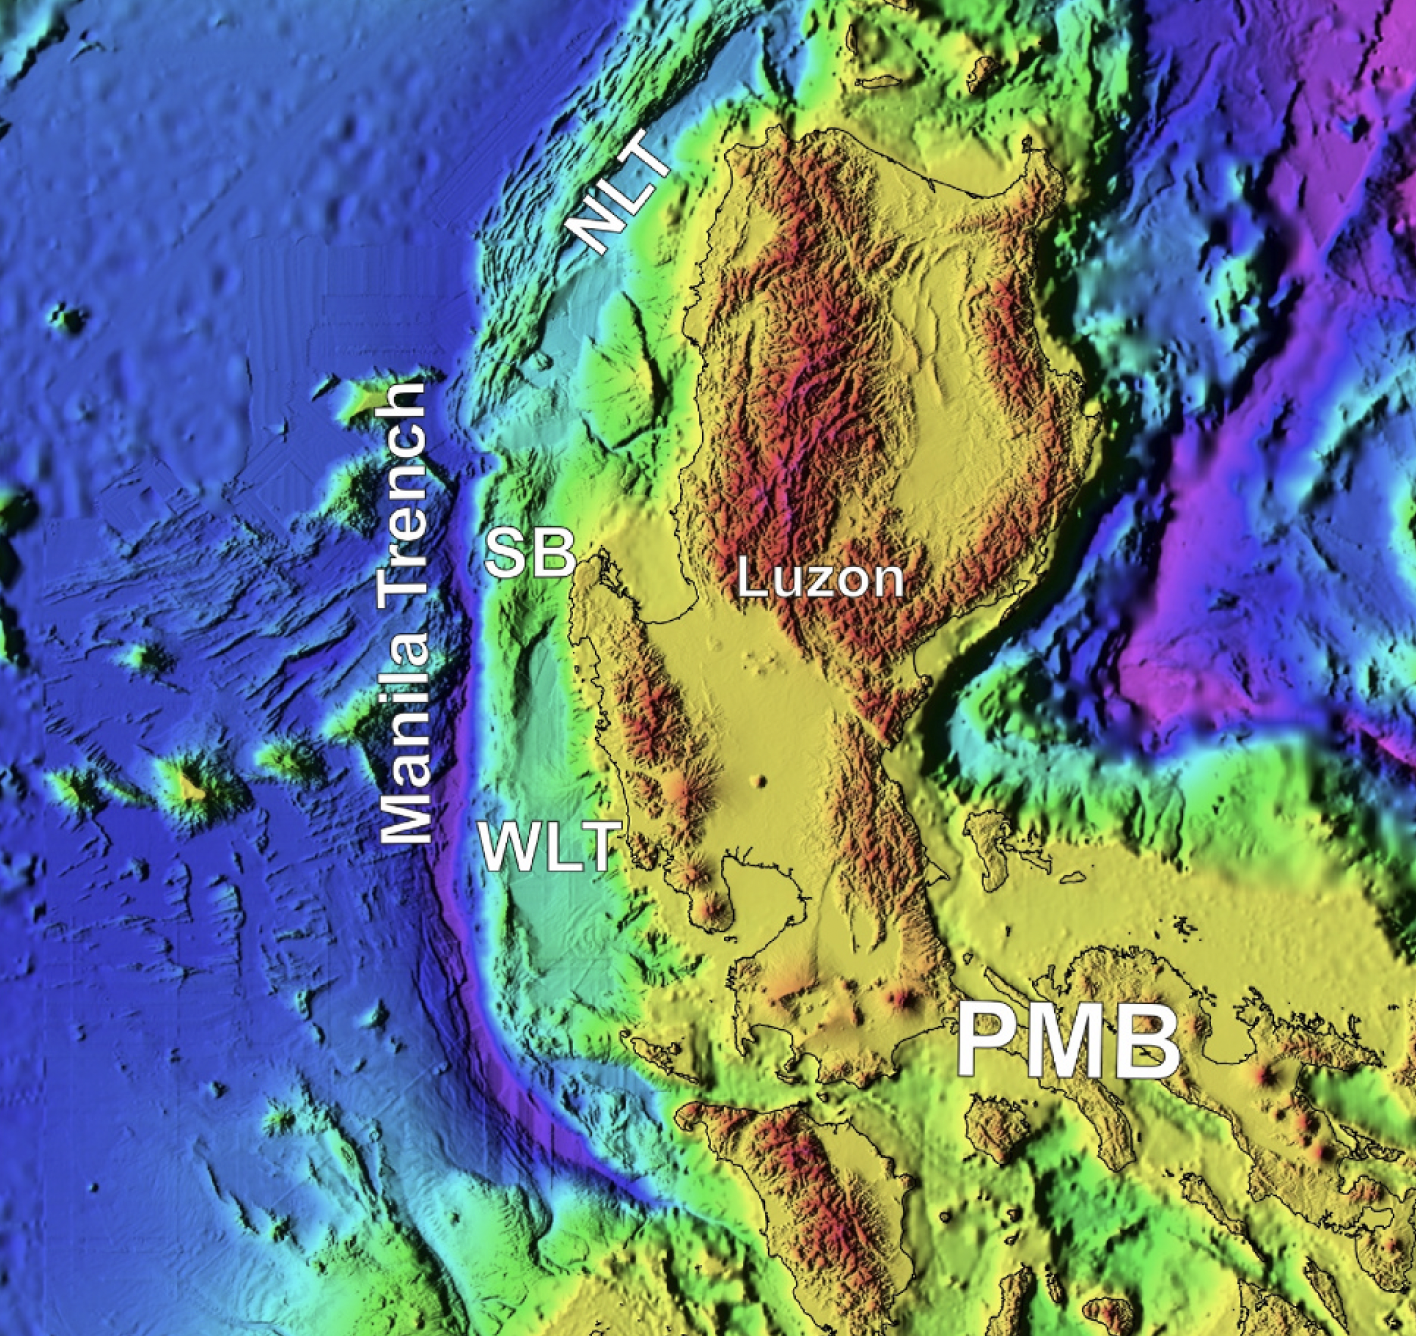 Researchers see possible methane gas deposit in Manila Trench